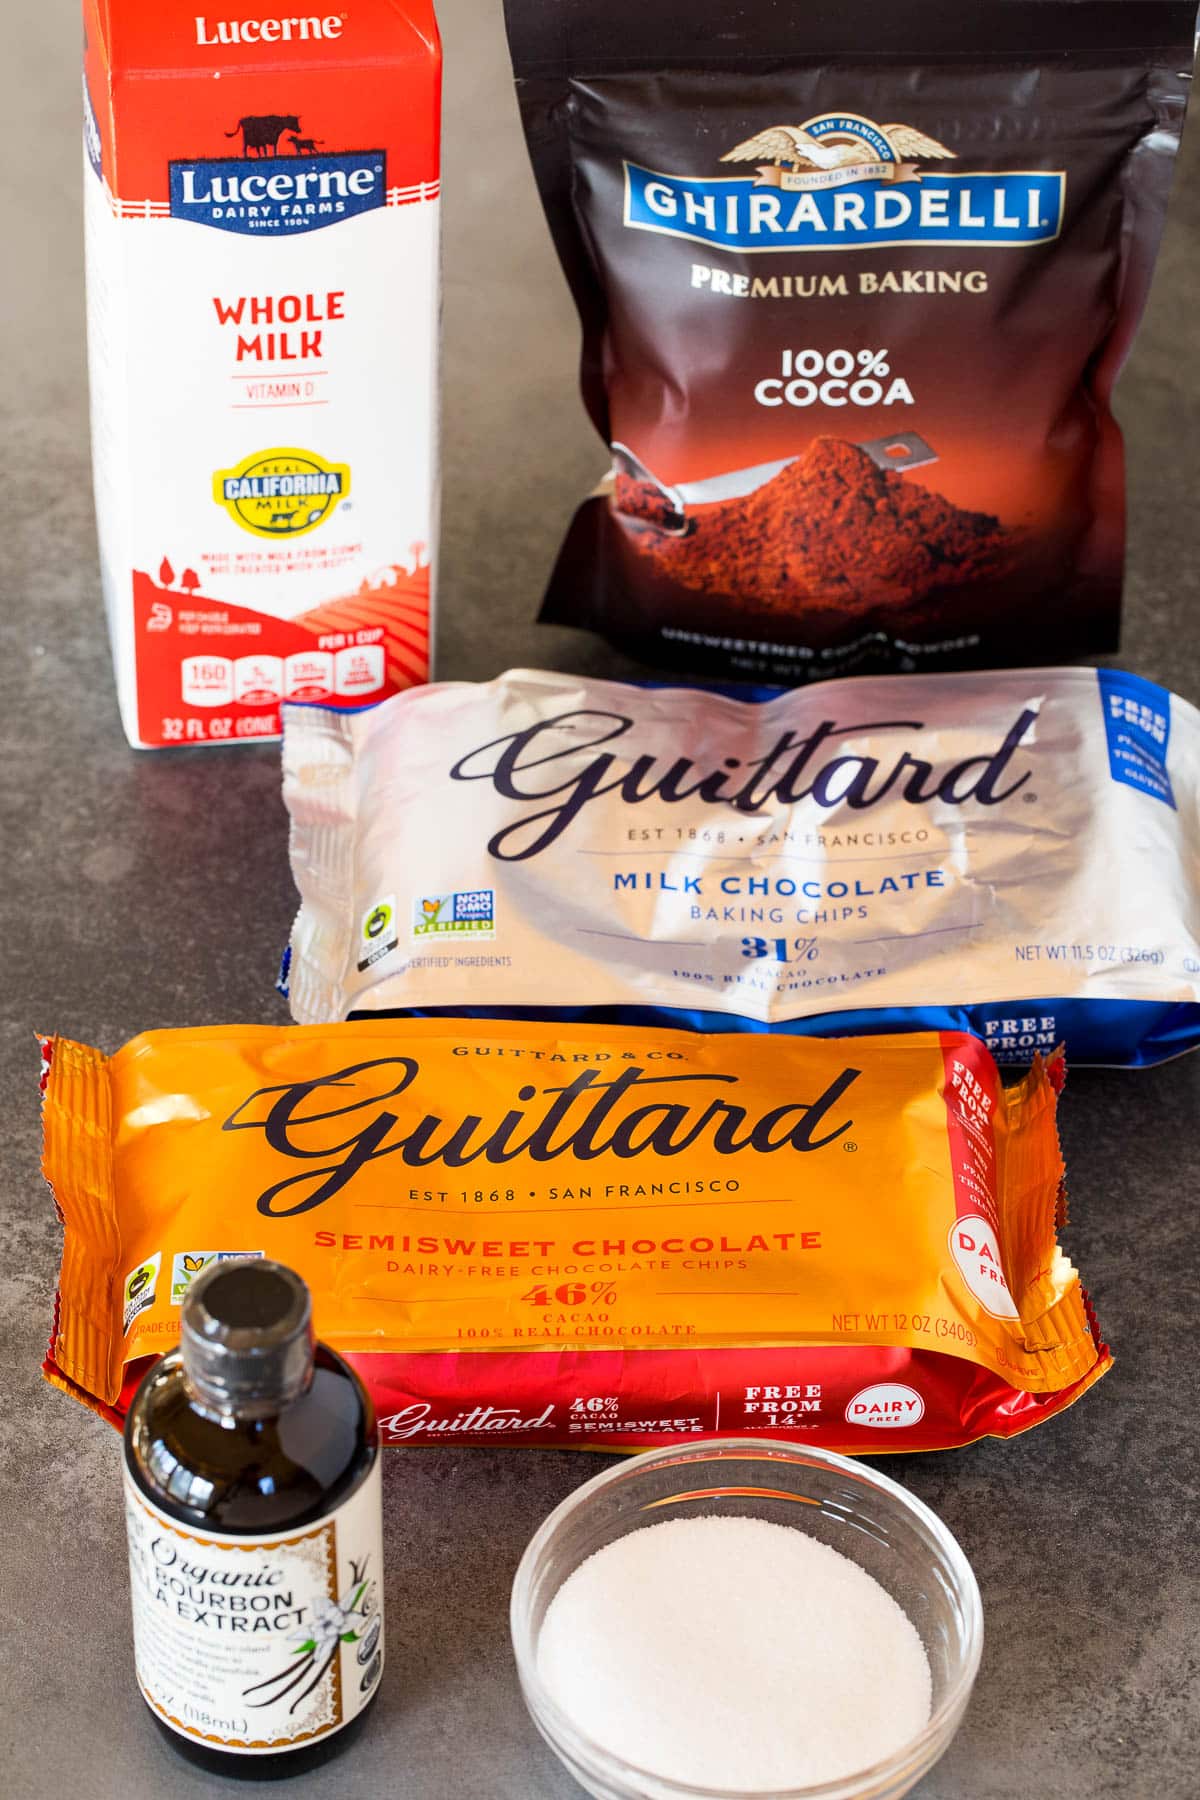 Hot cocoa ingredients including milk, chocolate, cocoa powder and sugar.